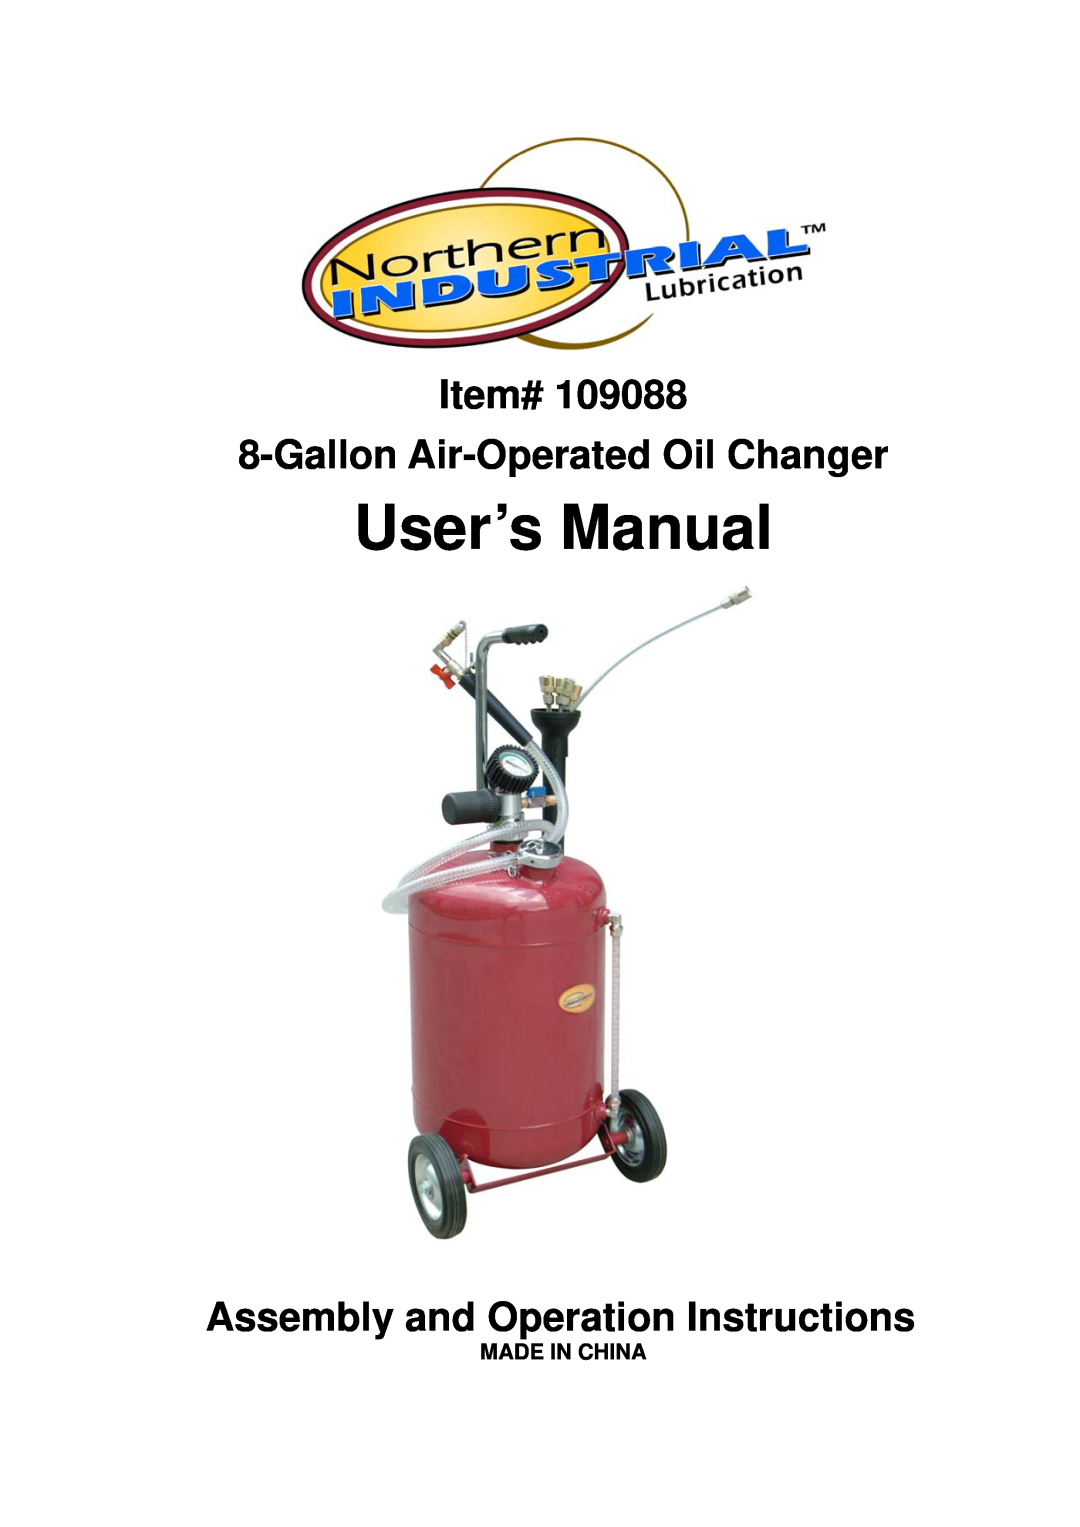 Northern Industrial Tools 109088 user manual Made In China, User’s Manual, Item# 8-Gallon Air-Operated Oil Changer 